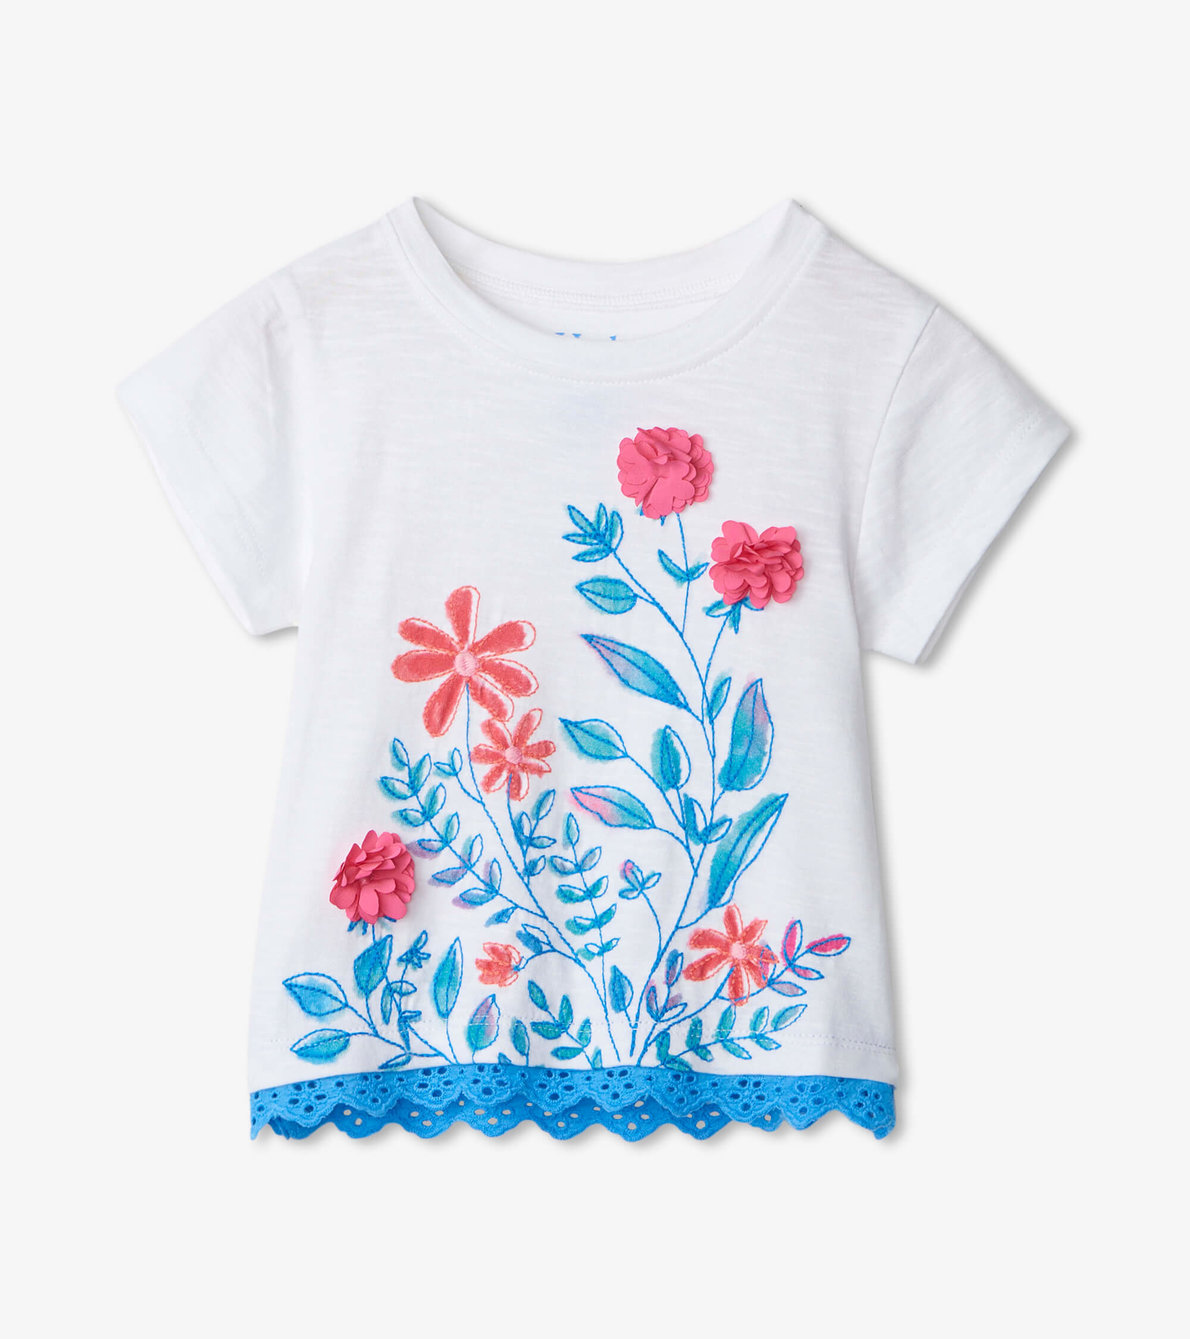 View larger image of Spring Blooms Baby Tee